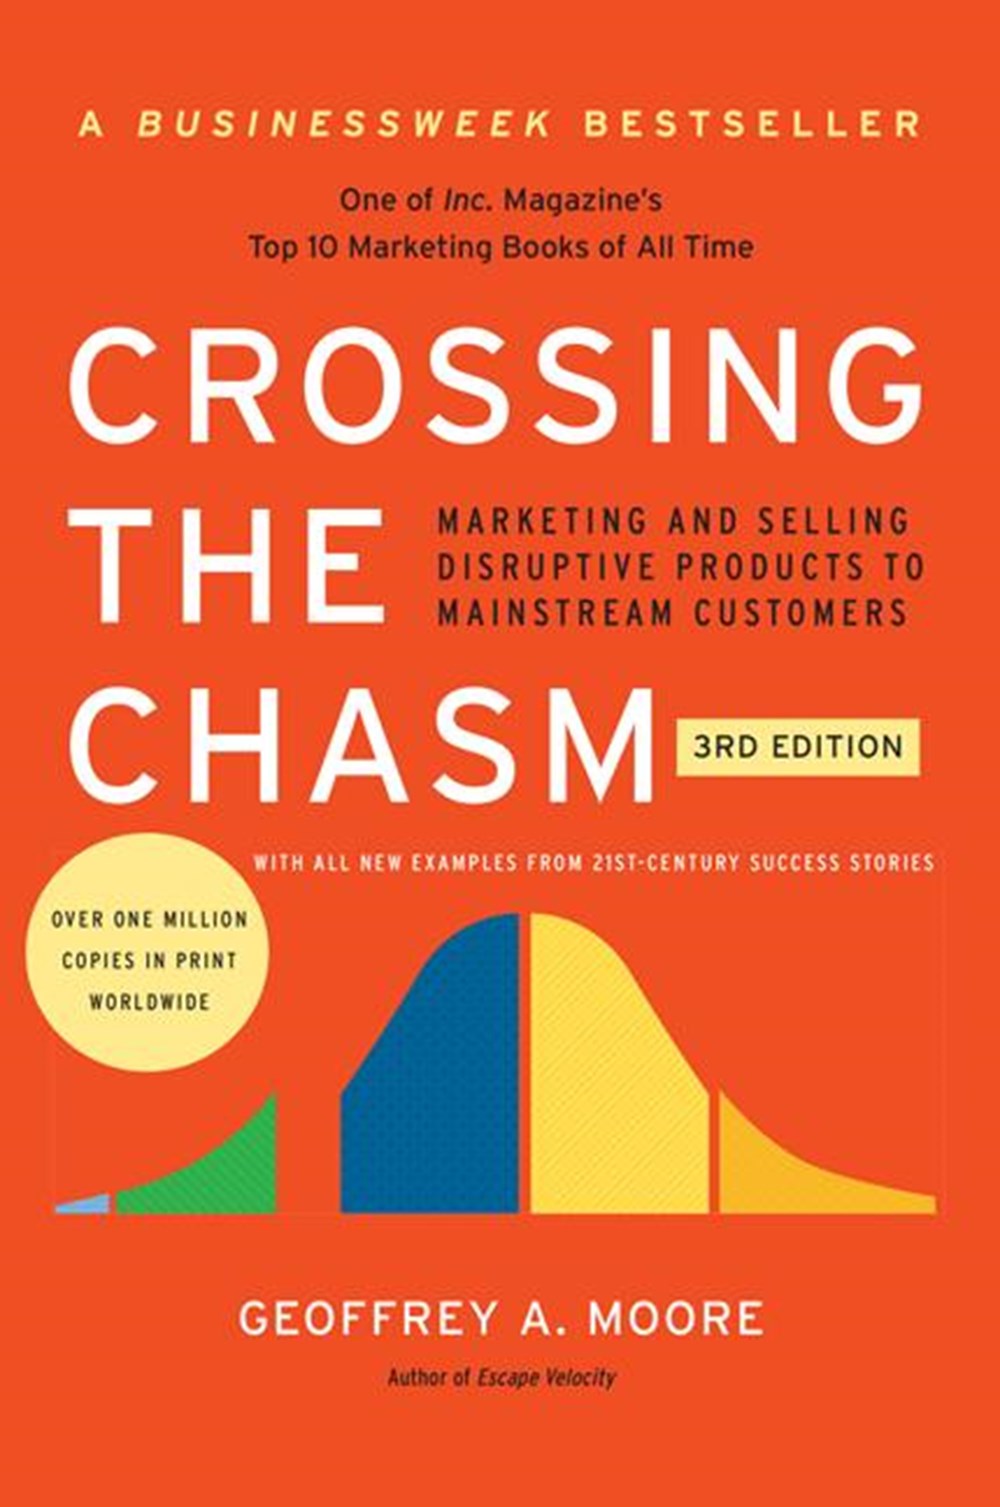 Crossing the Chasm, 3rd Edition Marketing and Selling Disruptive Products to Mainstream Customers